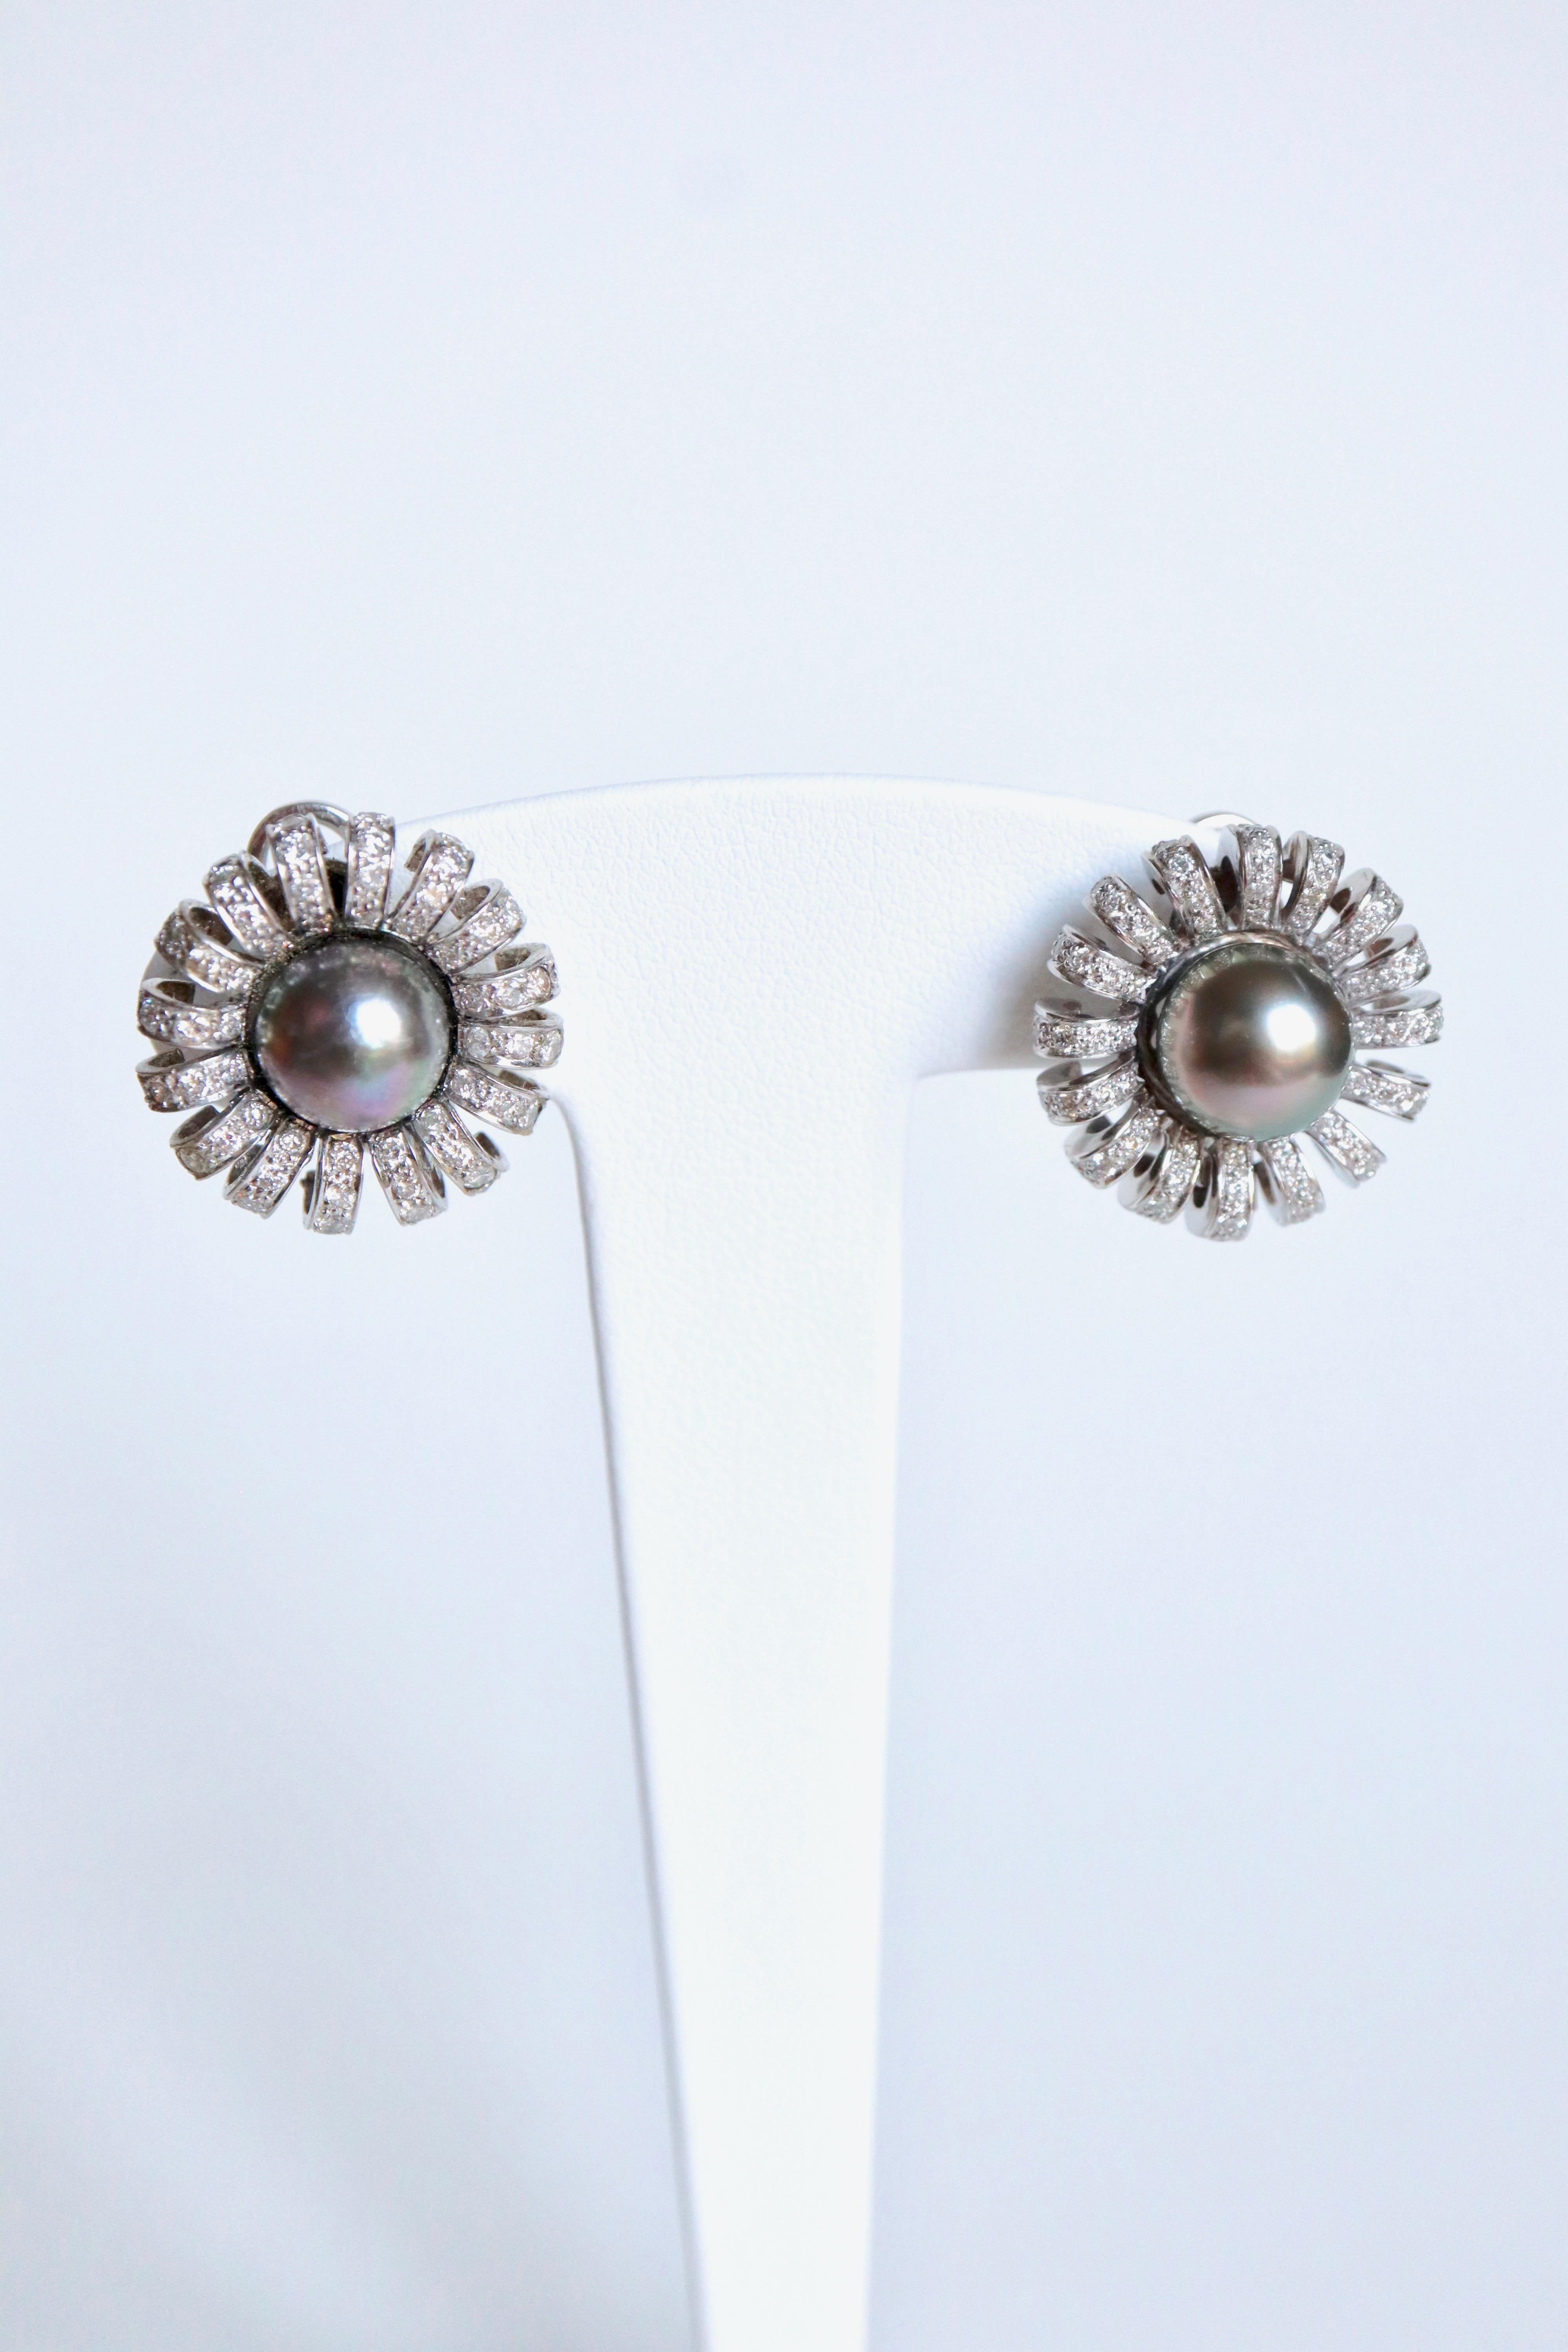 White Gold, Black Pearl and Diamond clip-on Earrings
Retractable rods: Clips for pierced or non-pierced ears.
Pearls : about 9 mm
Weight: 17.9g 
Diameter : 2 cm
Eagle Head Hallmark